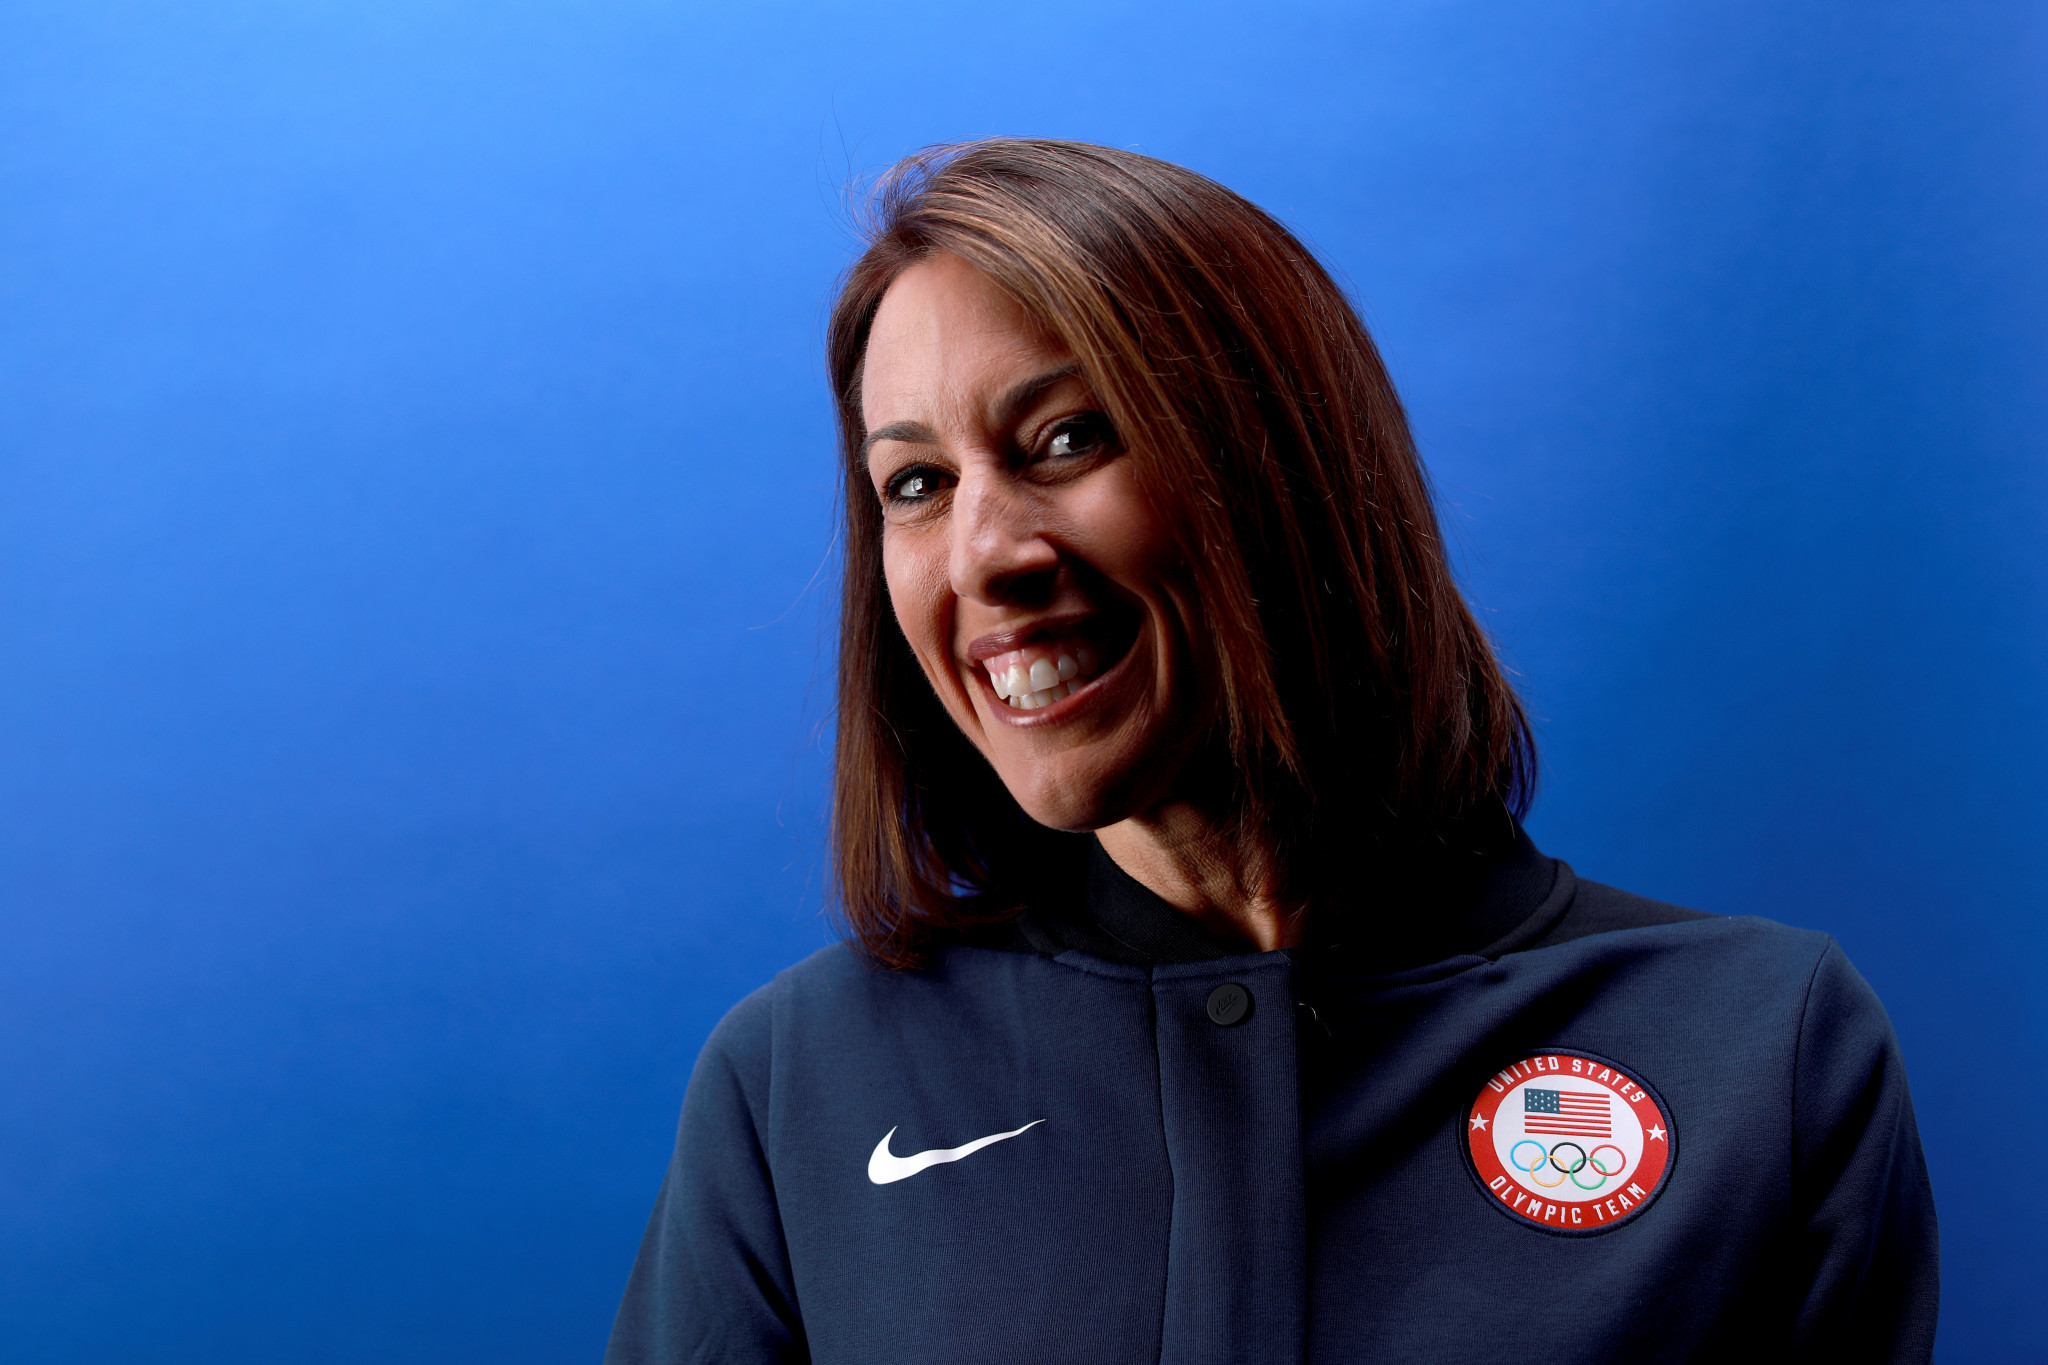 Los Angeles 2028 chief athlete officer Evans nominated for treasurer position at FINA 